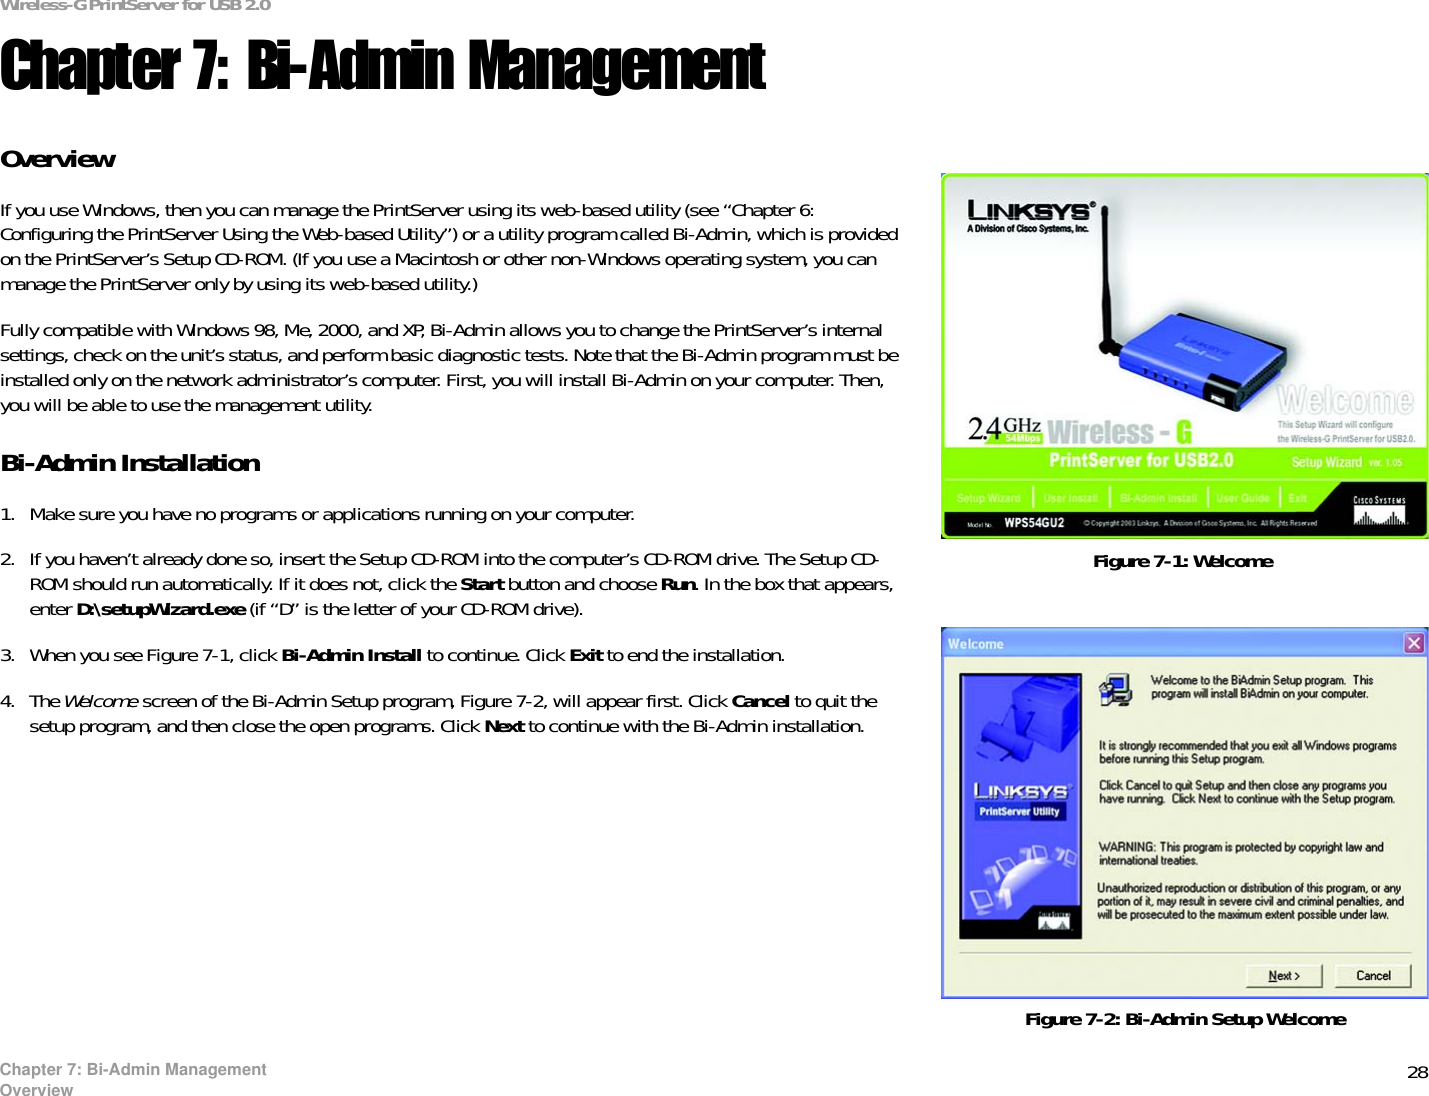 28Wireless-G PrintServer for USB 2.0Chapter 7: Bi-Admin ManagementOverviewChapter 7: Bi-Admin ManagementOverviewIf you use Windows, then you can manage the PrintServer using its web-based utility (see “Chapter 6: Configuring the PrintServer Using the Web-based Utility”) or a utility program called Bi-Admin, which is provided on the PrintServer’s Setup CD-ROM. (If you use a Macintosh or other non-Windows operating system, you can manage the PrintServer only by using its web-based utility.)Fully compatible with Windows 98, Me, 2000, and XP, Bi-Admin allows you to change the PrintServer’s internal settings, check on the unit’s status, and perform basic diagnostic tests. Note that the Bi-Admin program must be installed only on the network administrator’s computer. First, you will install Bi-Admin on your computer. Then, you will be able to use the management utility.Bi-Admin Installation1. Make sure you have no programs or applications running on your computer.2. If you haven’t already done so, insert the Setup CD-ROM into the computer’s CD-ROM drive. The Setup CD-ROM should run automatically. If it does not, click the Start button and choose Run. In the box that appears, enter D:\setupWizard.exe (if “D” is the letter of your CD-ROM drive).3. When you see Figure 7-1, click Bi-Admin Install to continue. Click Exit to end the installation. 4. The Welcome screen of the Bi-Admin Setup program, Figure 7-2, will appear first. Click Cancel to quit the setup program, and then close the open programs. Click Next to continue with the Bi-Admin installation. Figure 7-2: Bi-Admin Setup WelcomeFigure 7-1: Welcome